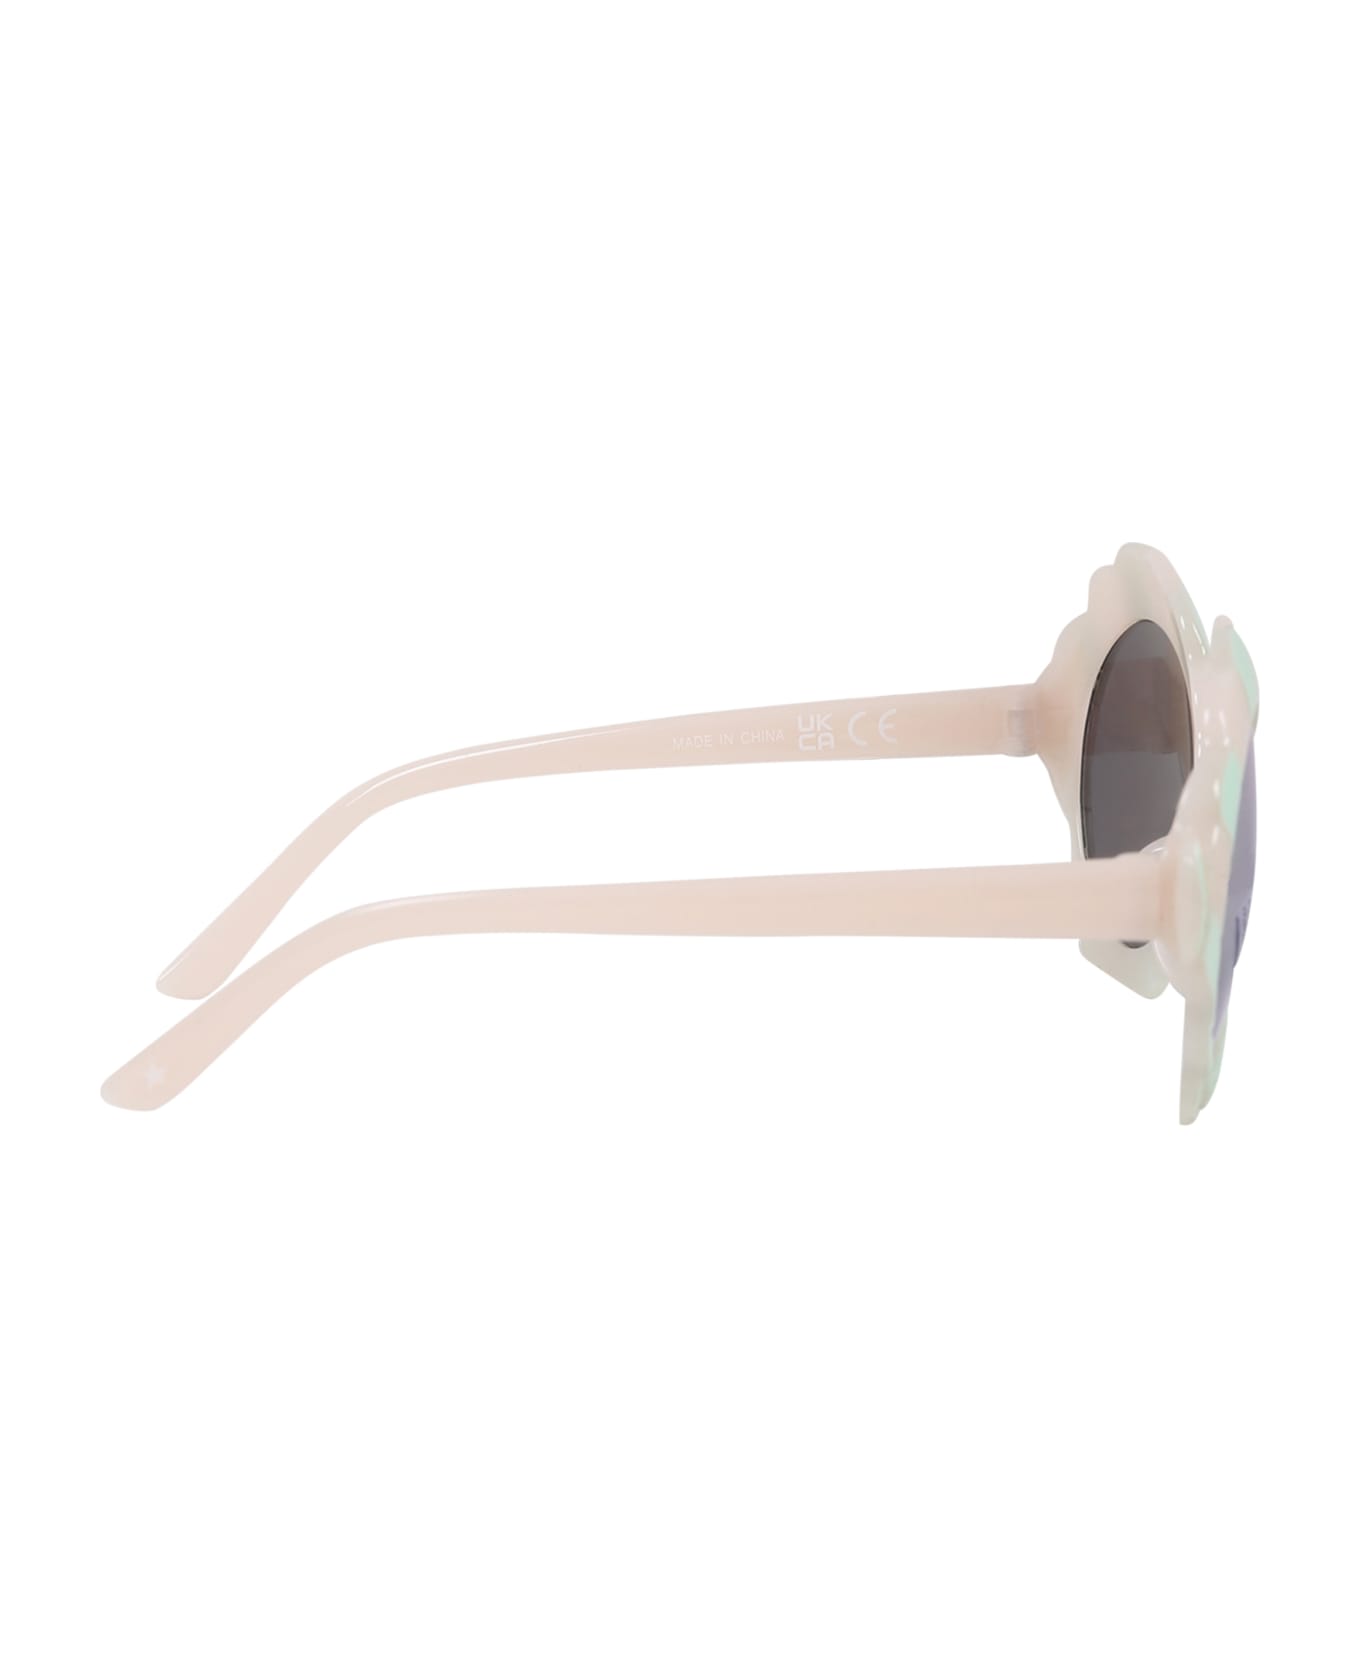 Molo Multicolor Silly Sunglasses For Girl - Multicolor アクセサリー＆ギフト